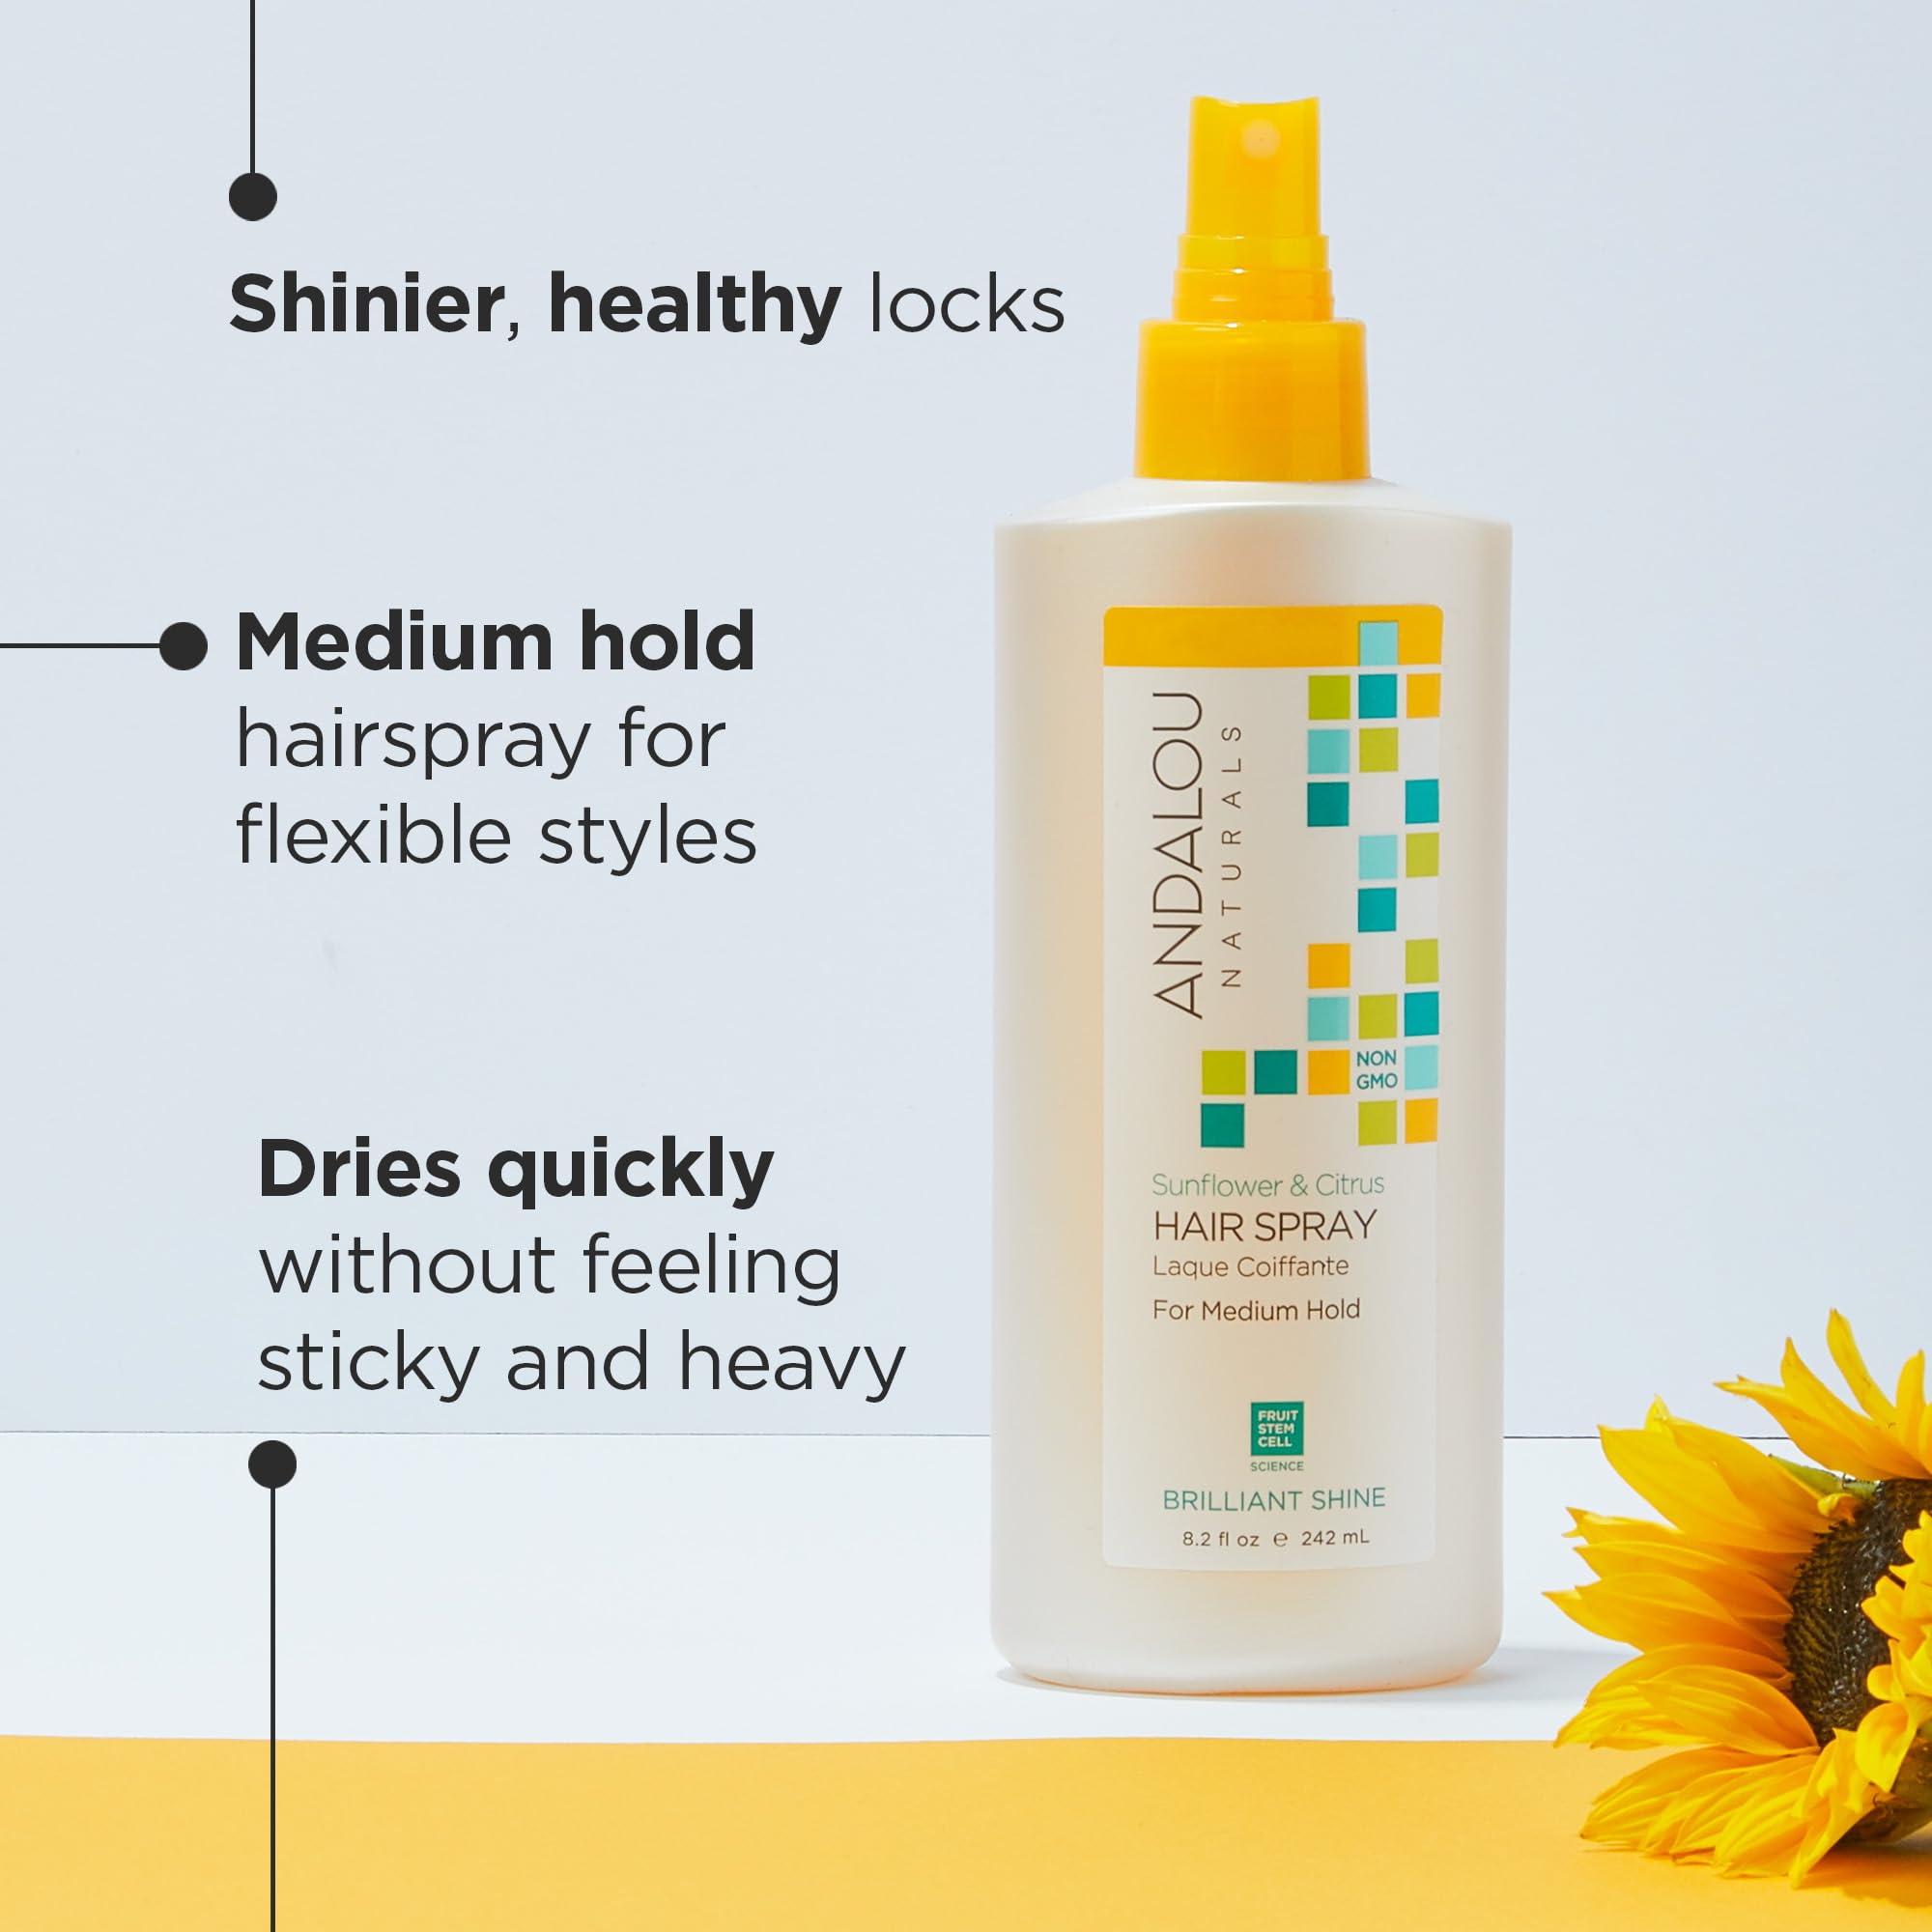 Andalou Naturals Brilliant Shine Hair Spray, Sunflower & Citrus, Styling and Hair Shine Spray with Medium hold, Tames Frizzy Hair & Flyaways, Quick Drying & Non-Sticky, Cruelty Free, 8.2 Fl Oz